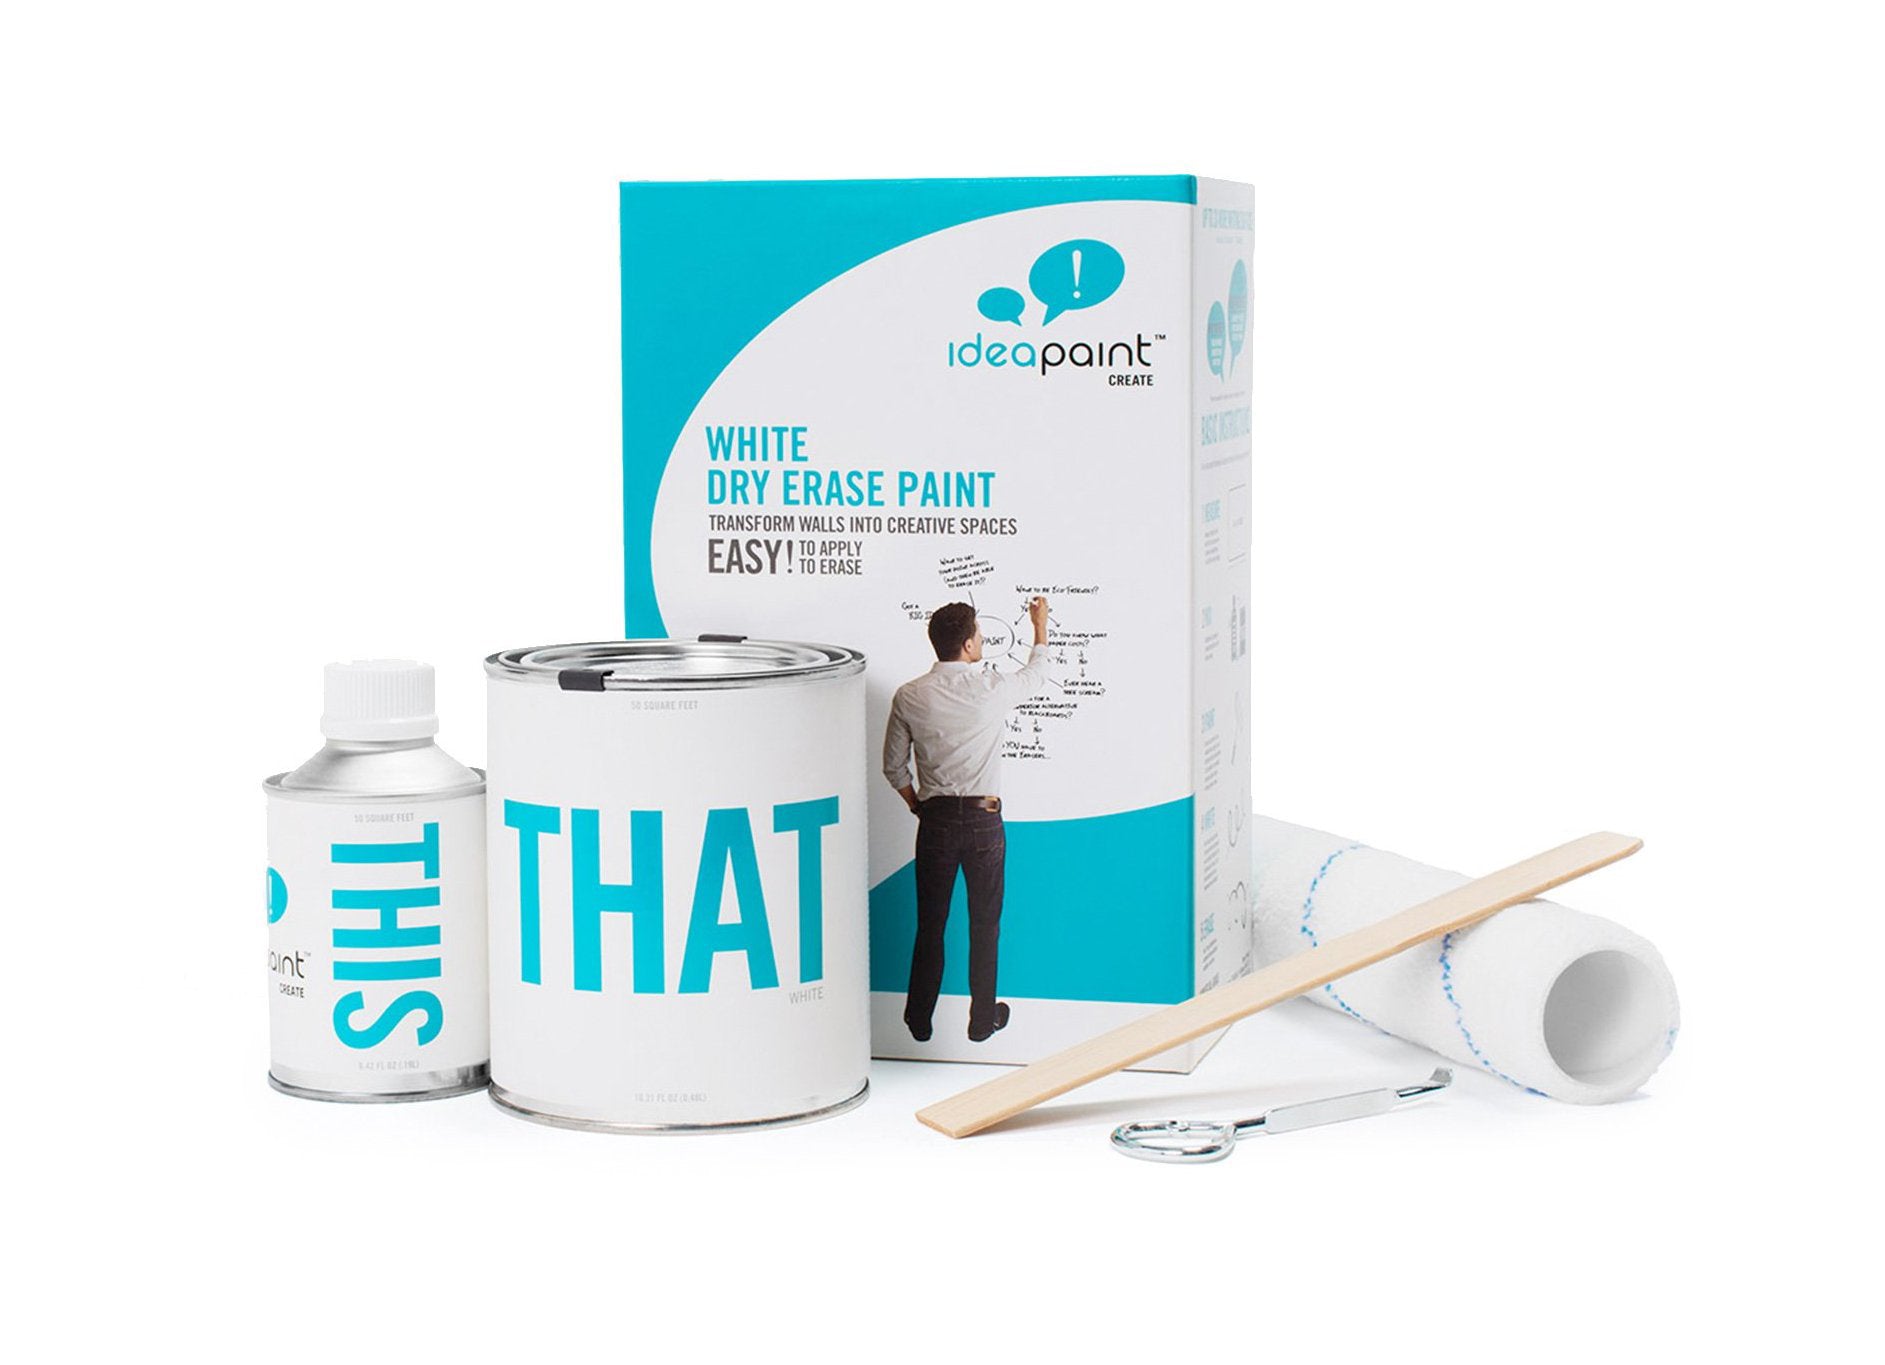 Crayola Take Note! Dry Erase Wall Paint - Clear 40 Sq ft